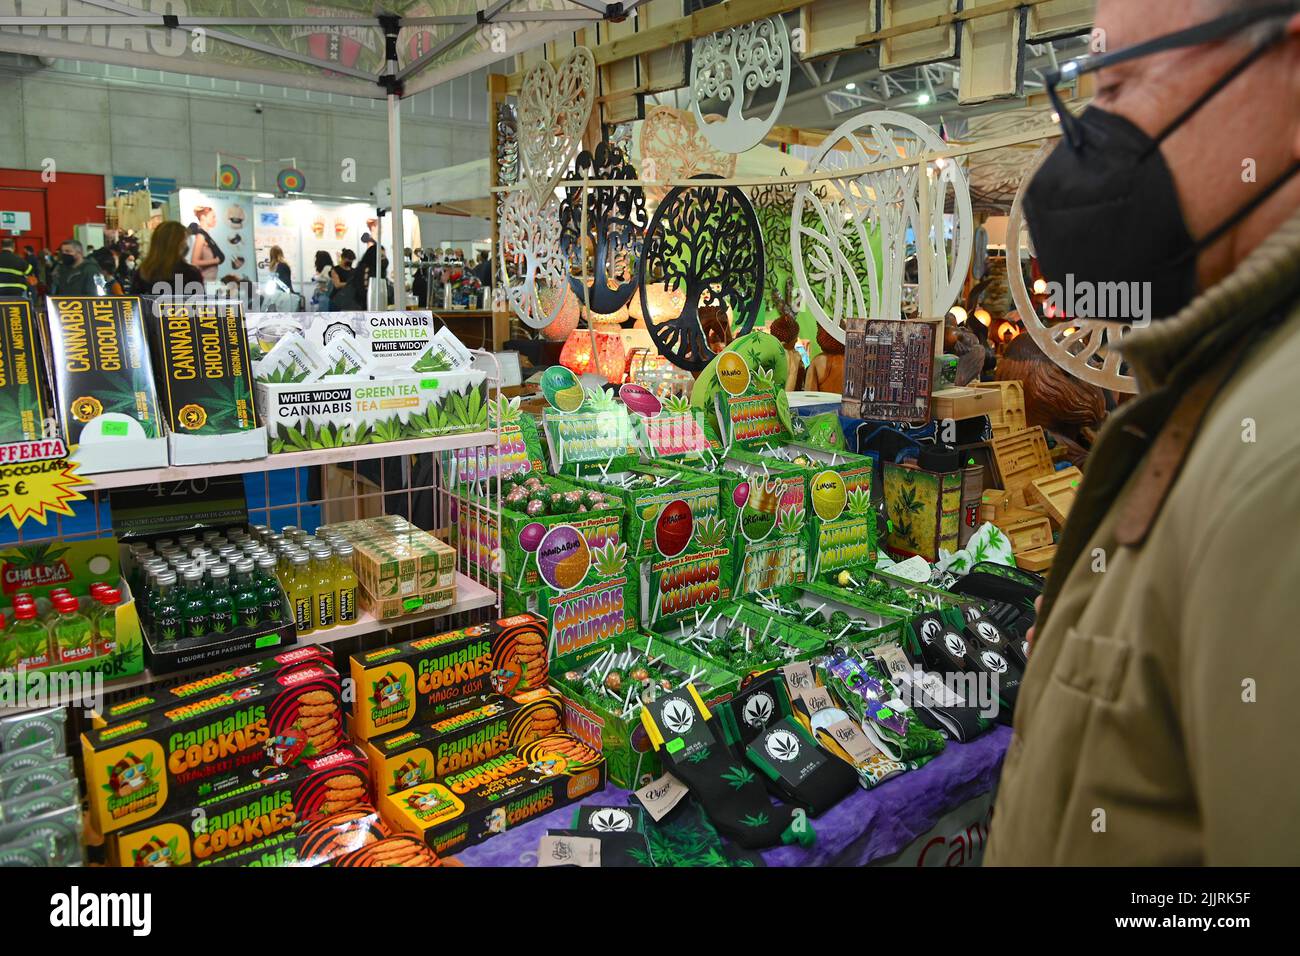 A display of legal hemp food products at Health and wellness fair in Turin, Italy Stock Photo